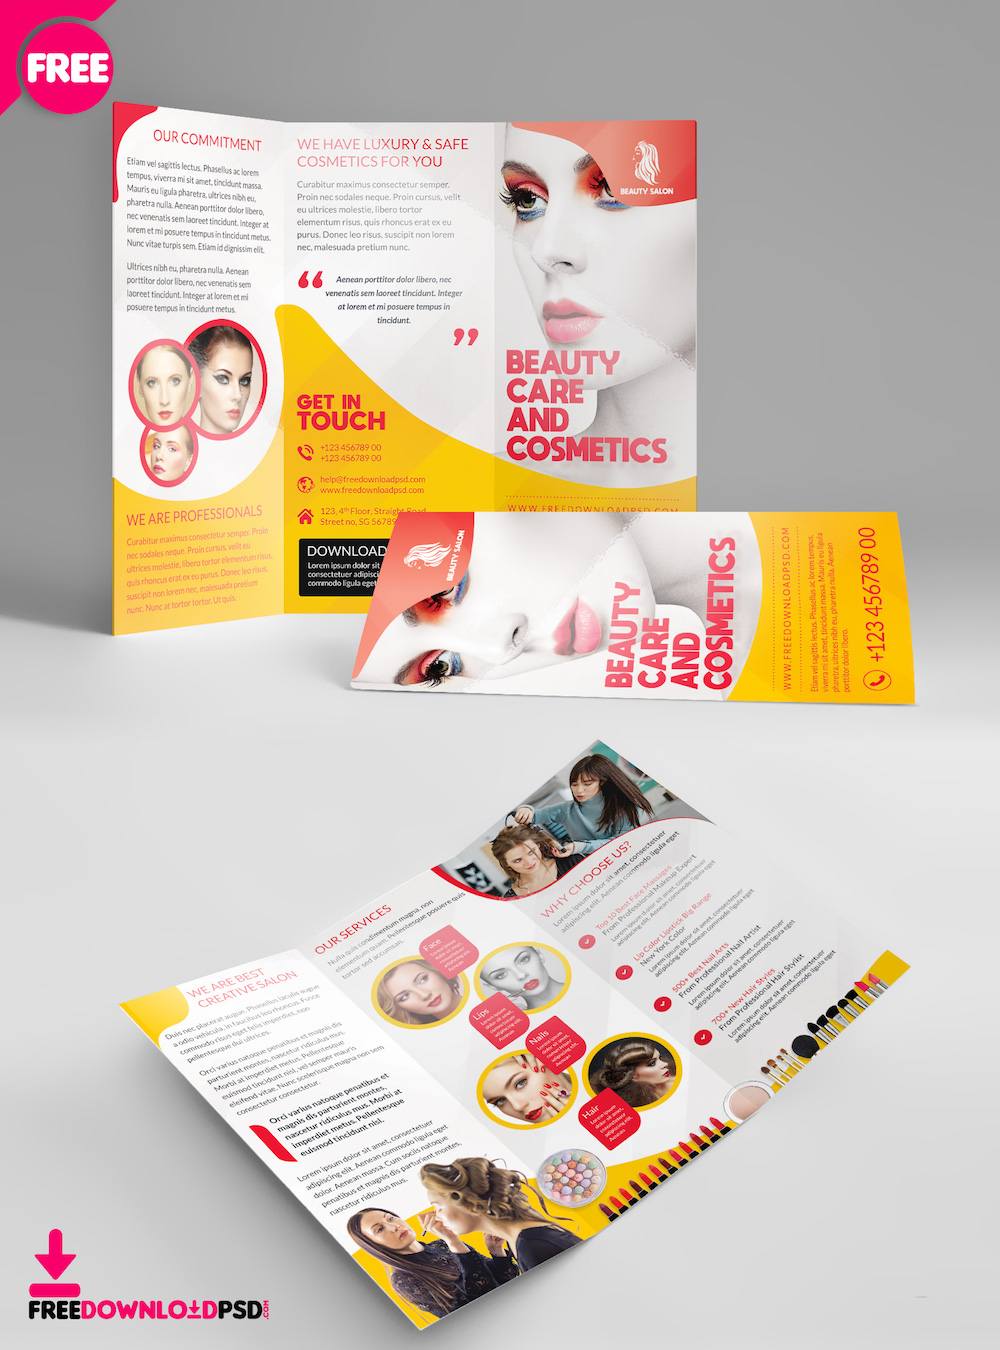 34 Best Free Brochure Mockups & Psd Templates 2019 – Colorlib With Regard To Single Page Brochure Templates Psd